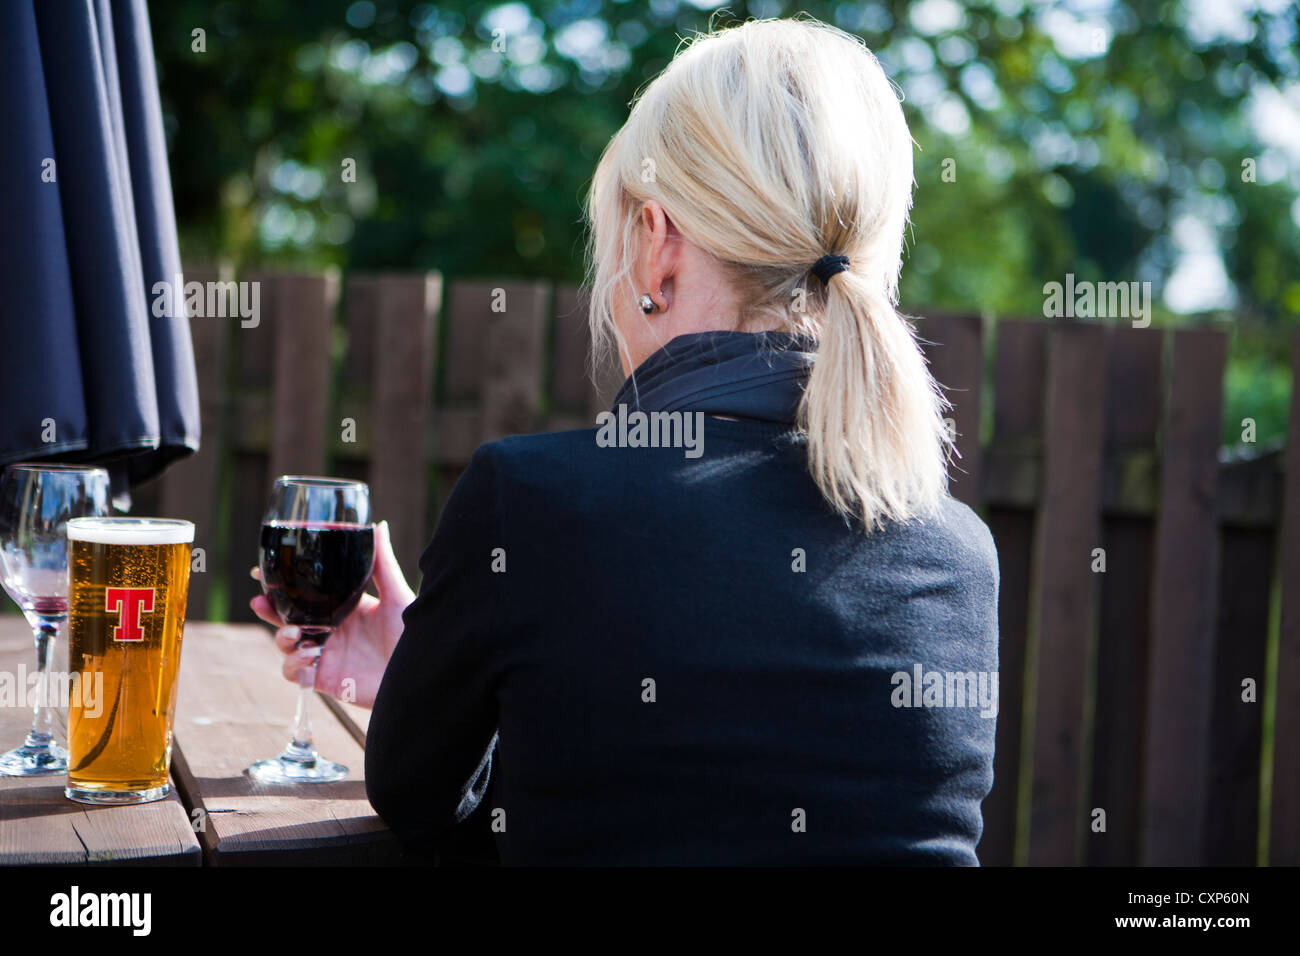 Rear view of a woman drinking beer and wine alone Stock Photo